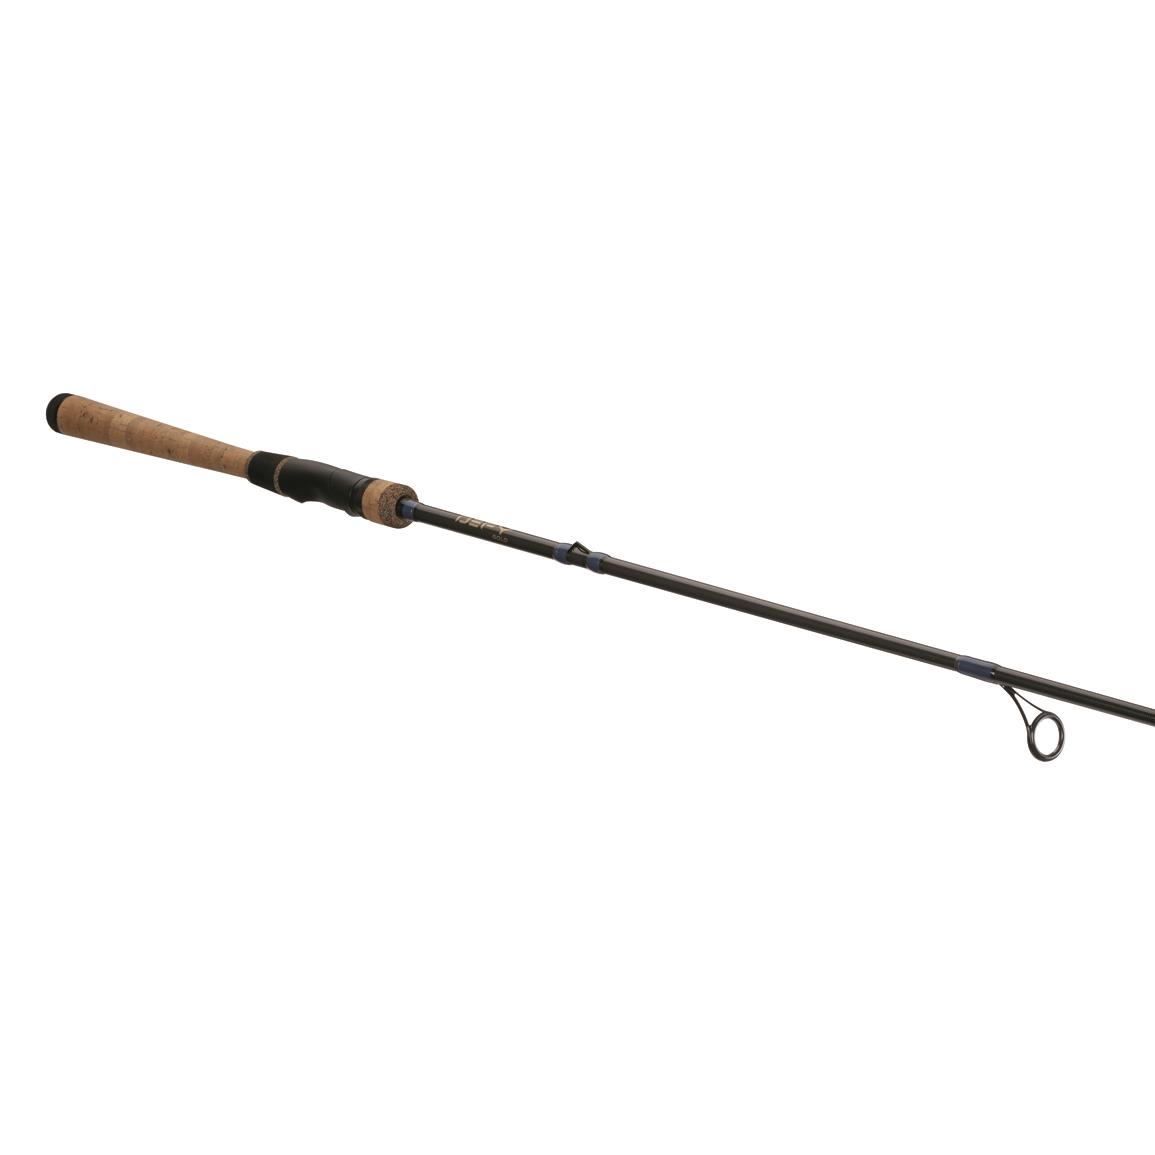 13 Fishing Ambition Youth Spinning Rod, 4'6 Length, Medium Light Power,  Fast Action - 729856, Spinning Rods at Sportsman's Guide